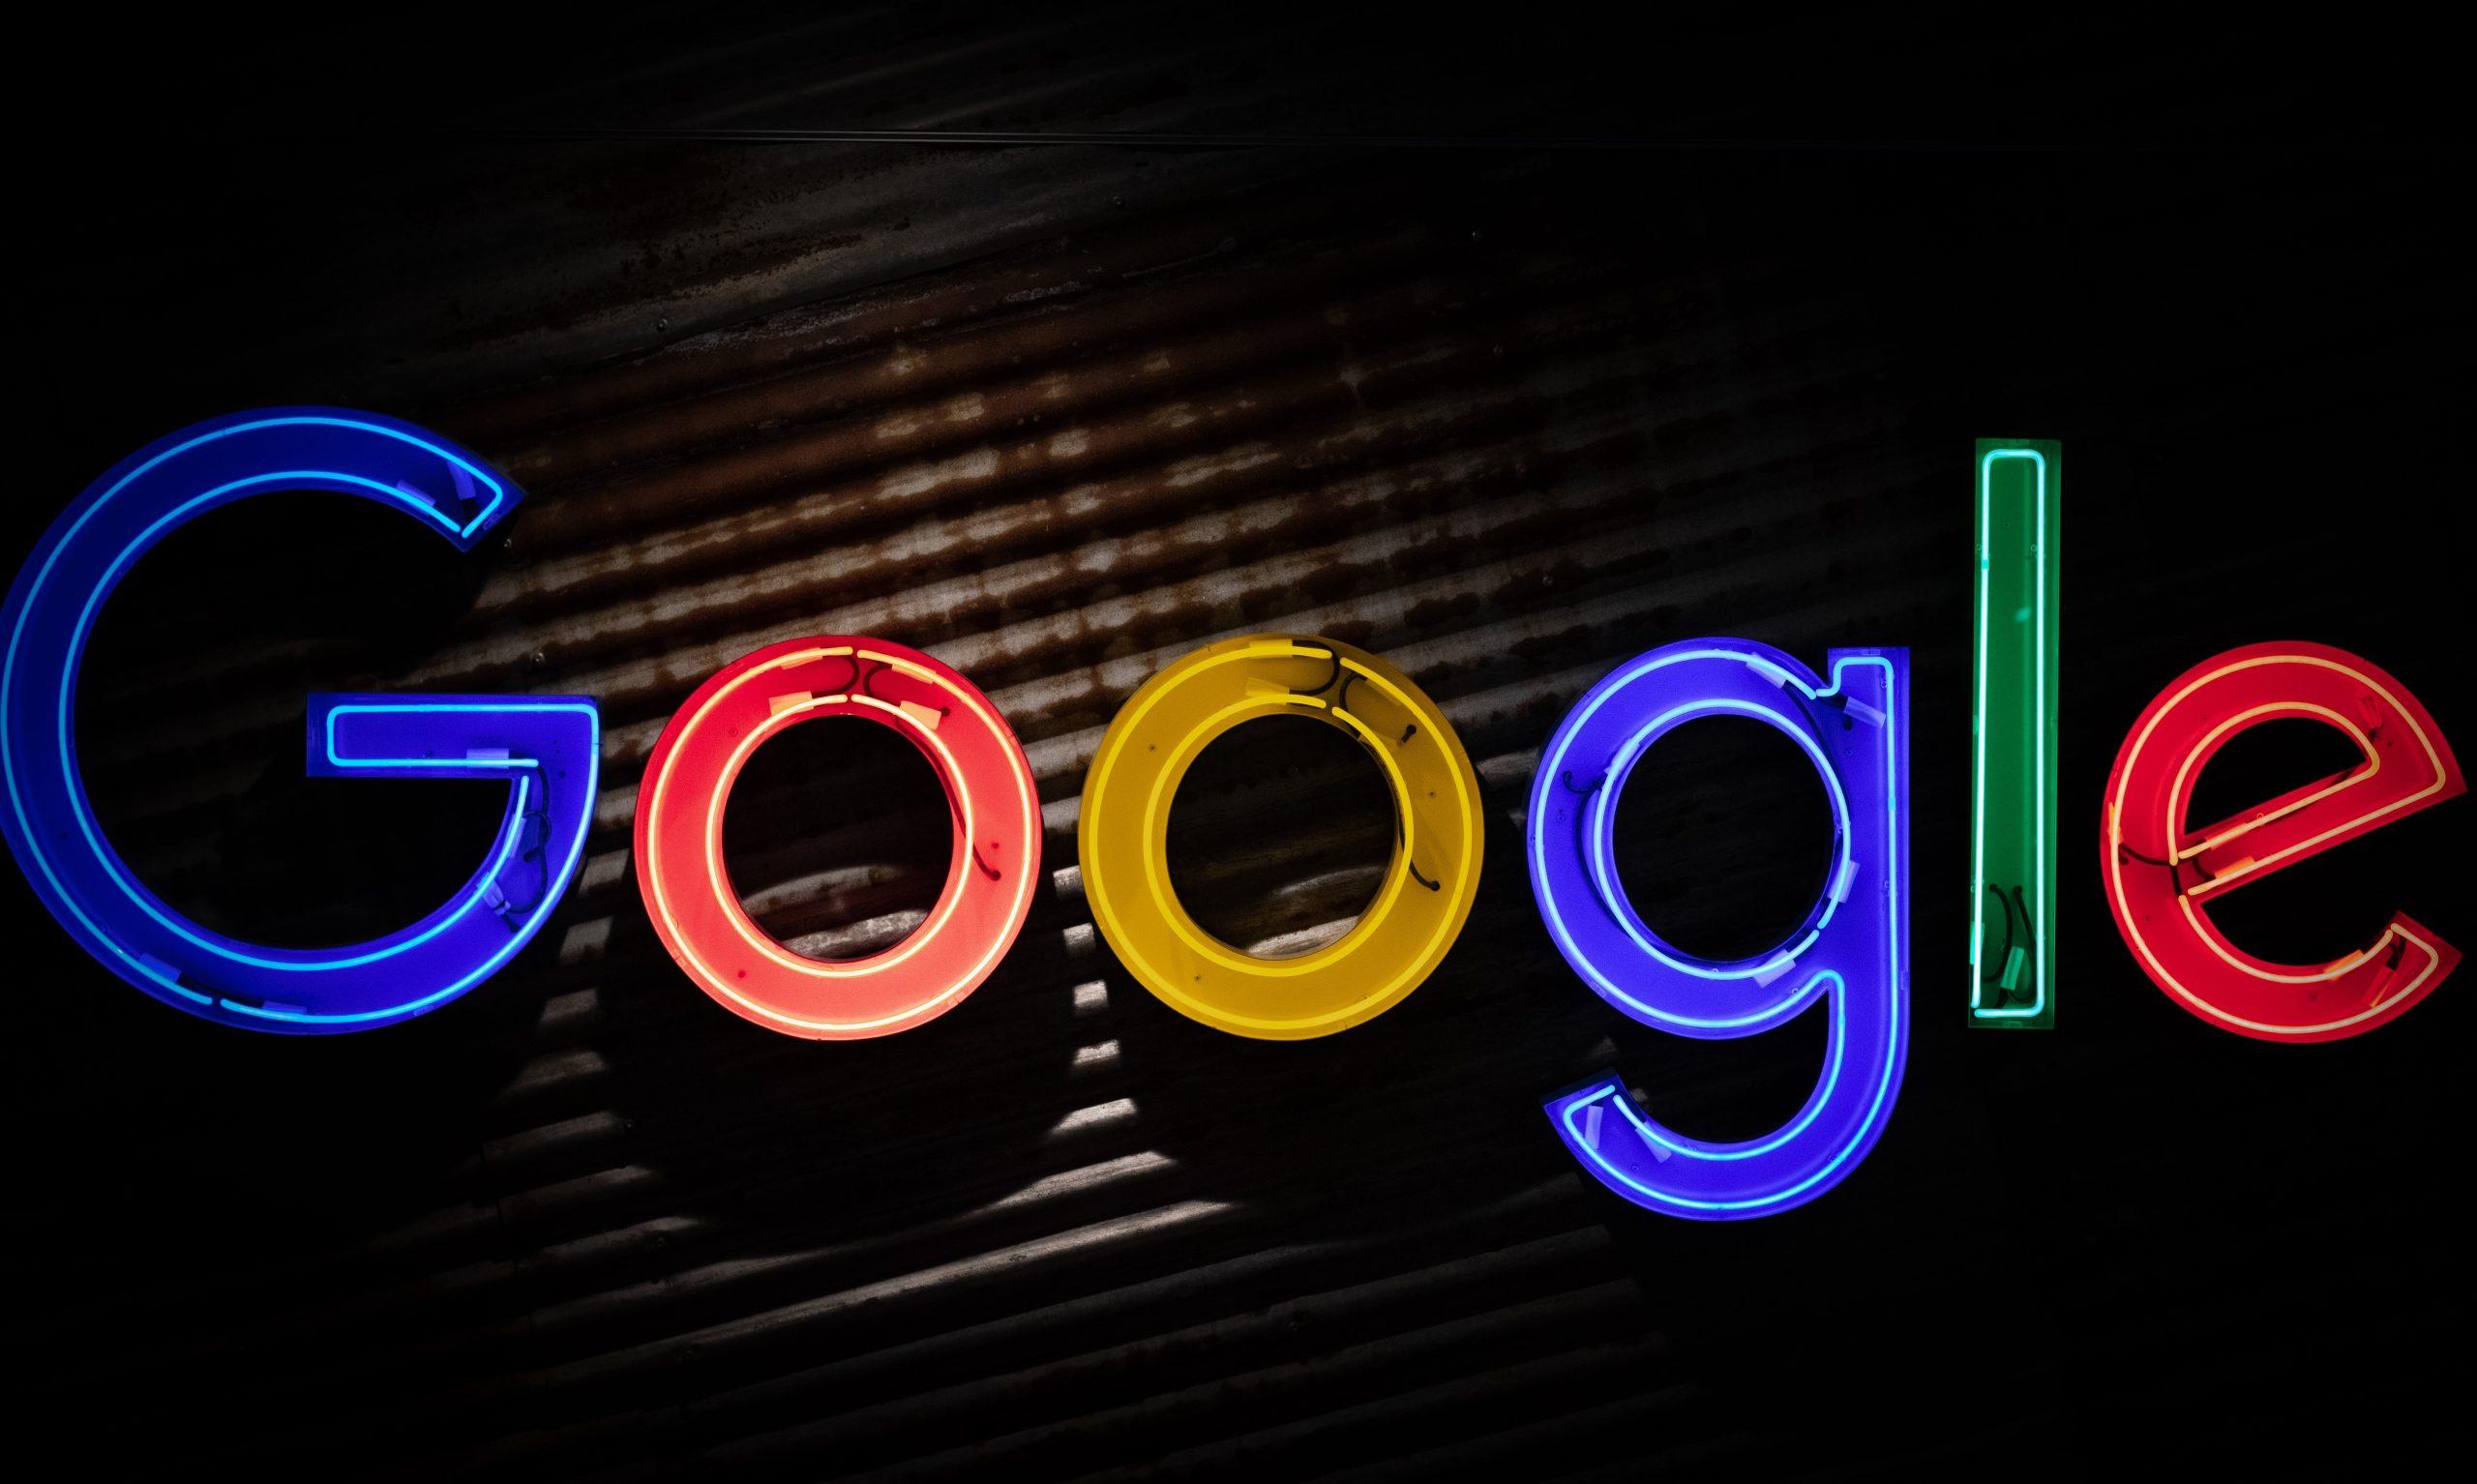 The Google logo on a darkened background as part of an article about Google fun facts.